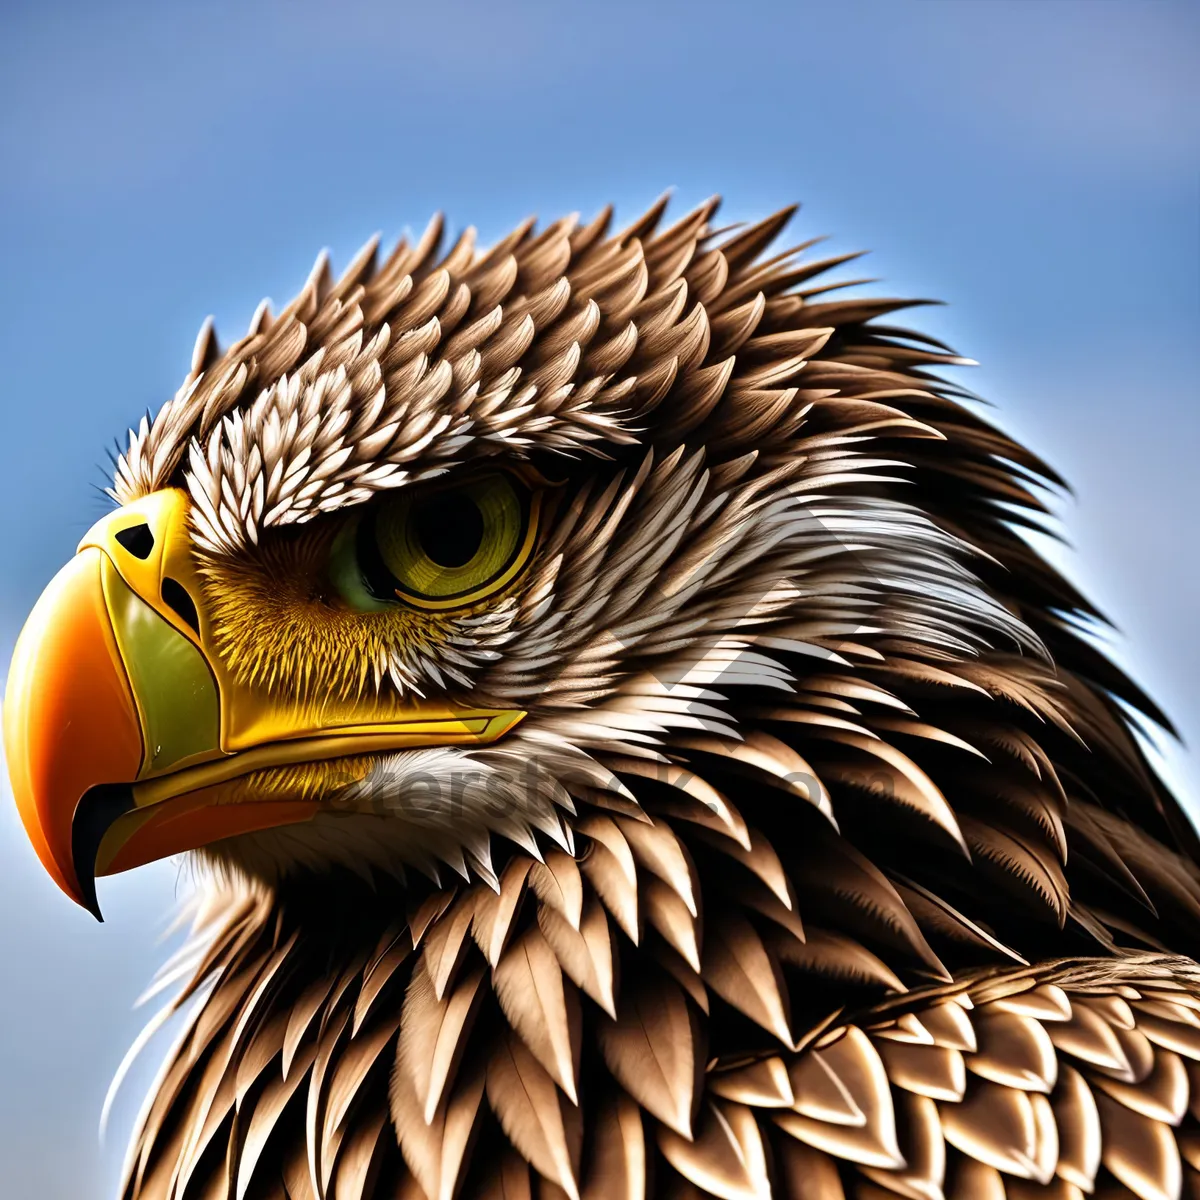 Picture of Bald Eagle Head: Majestic Hunter with Piercing Yellow Eyes